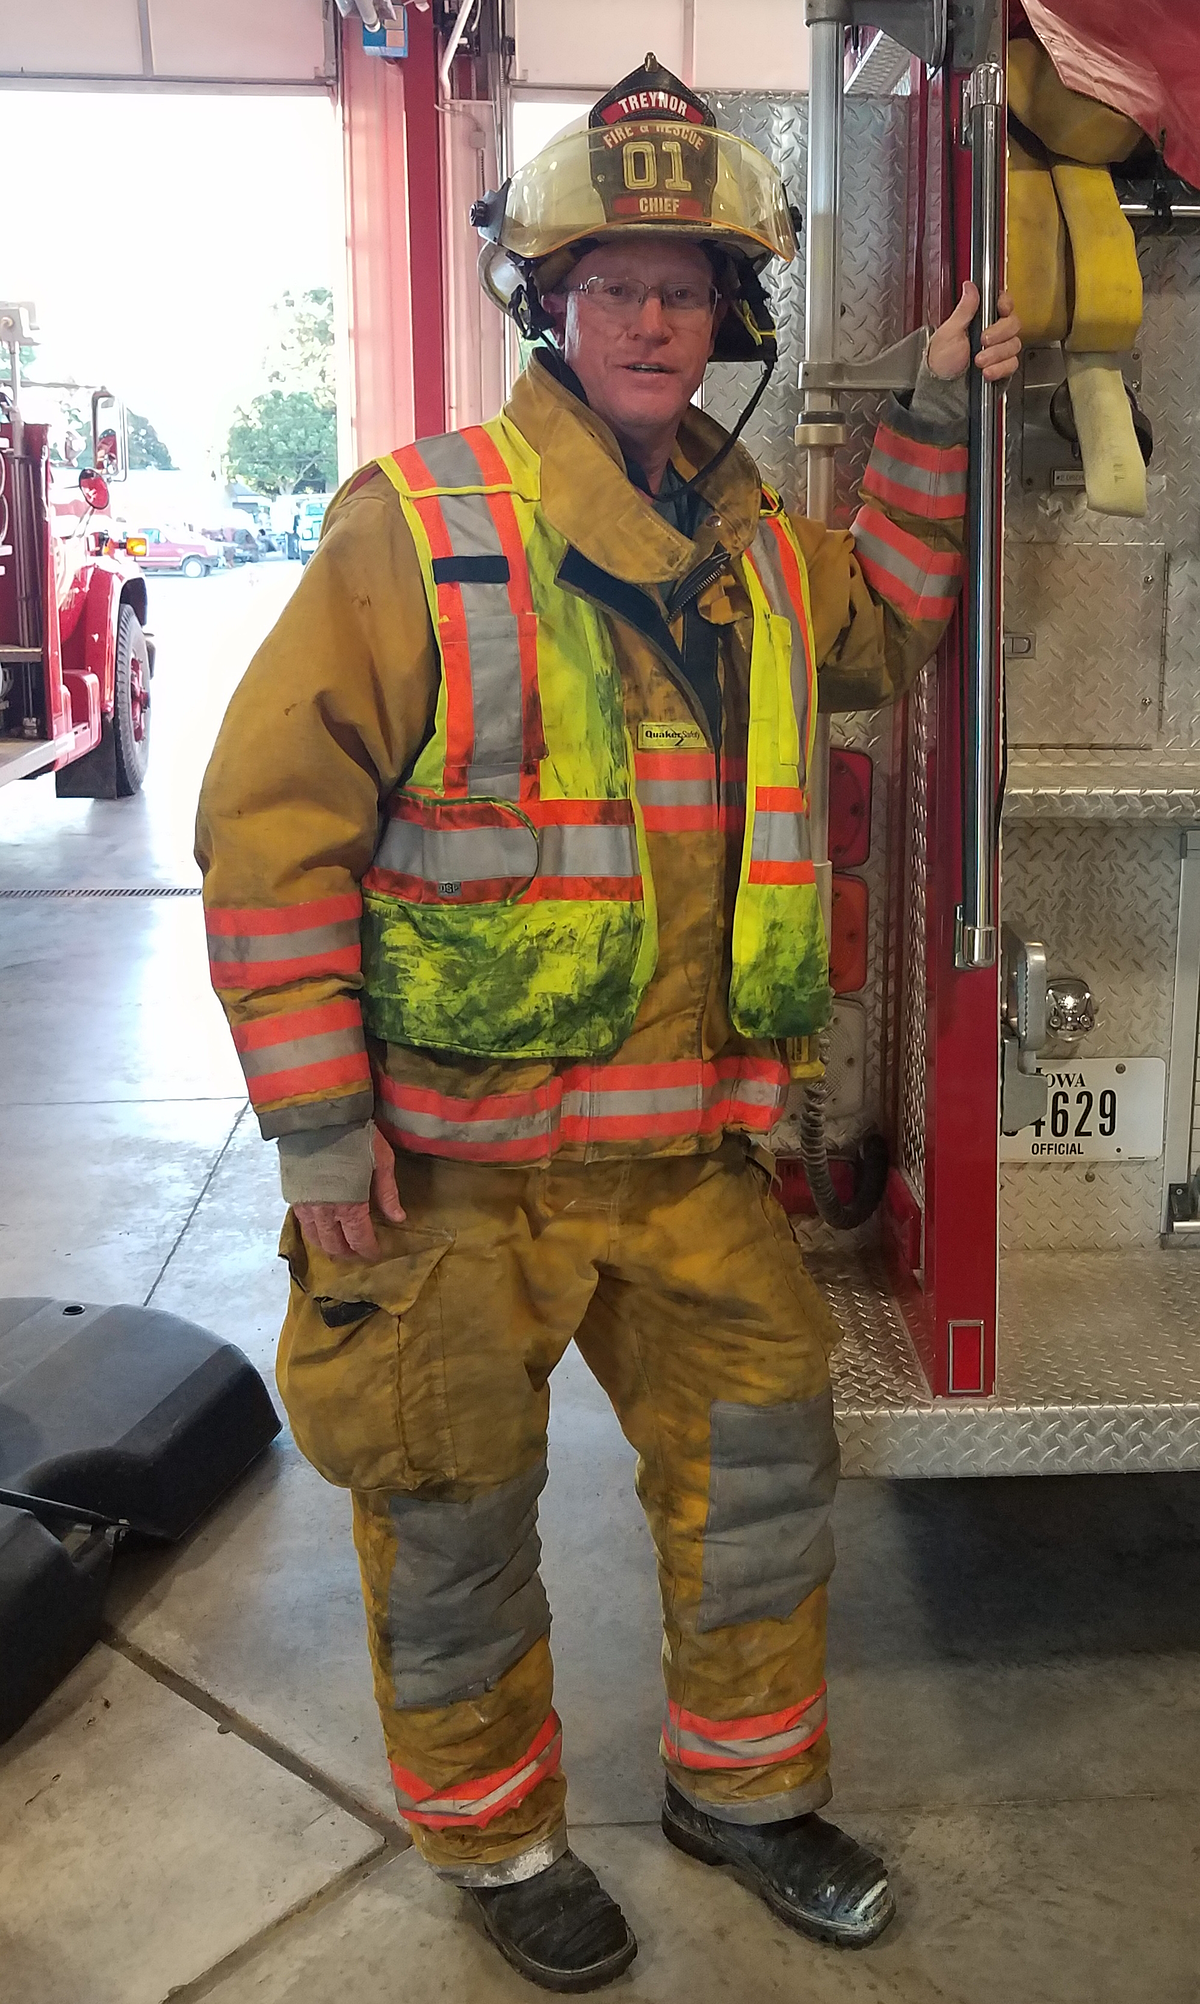 russ maguire in fire uniform at the fire station